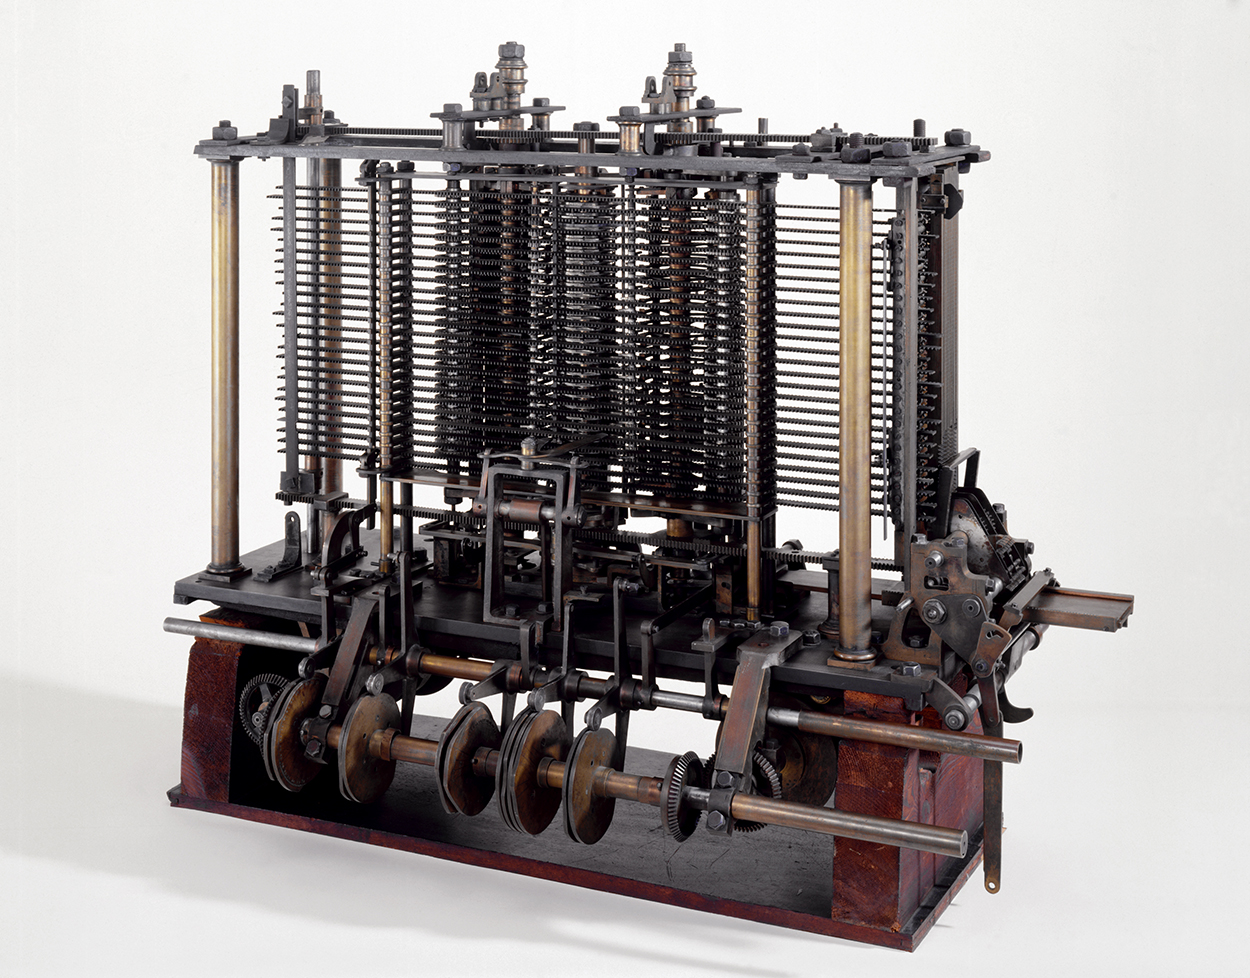 Babbages Analytical Engine, 1834-1871